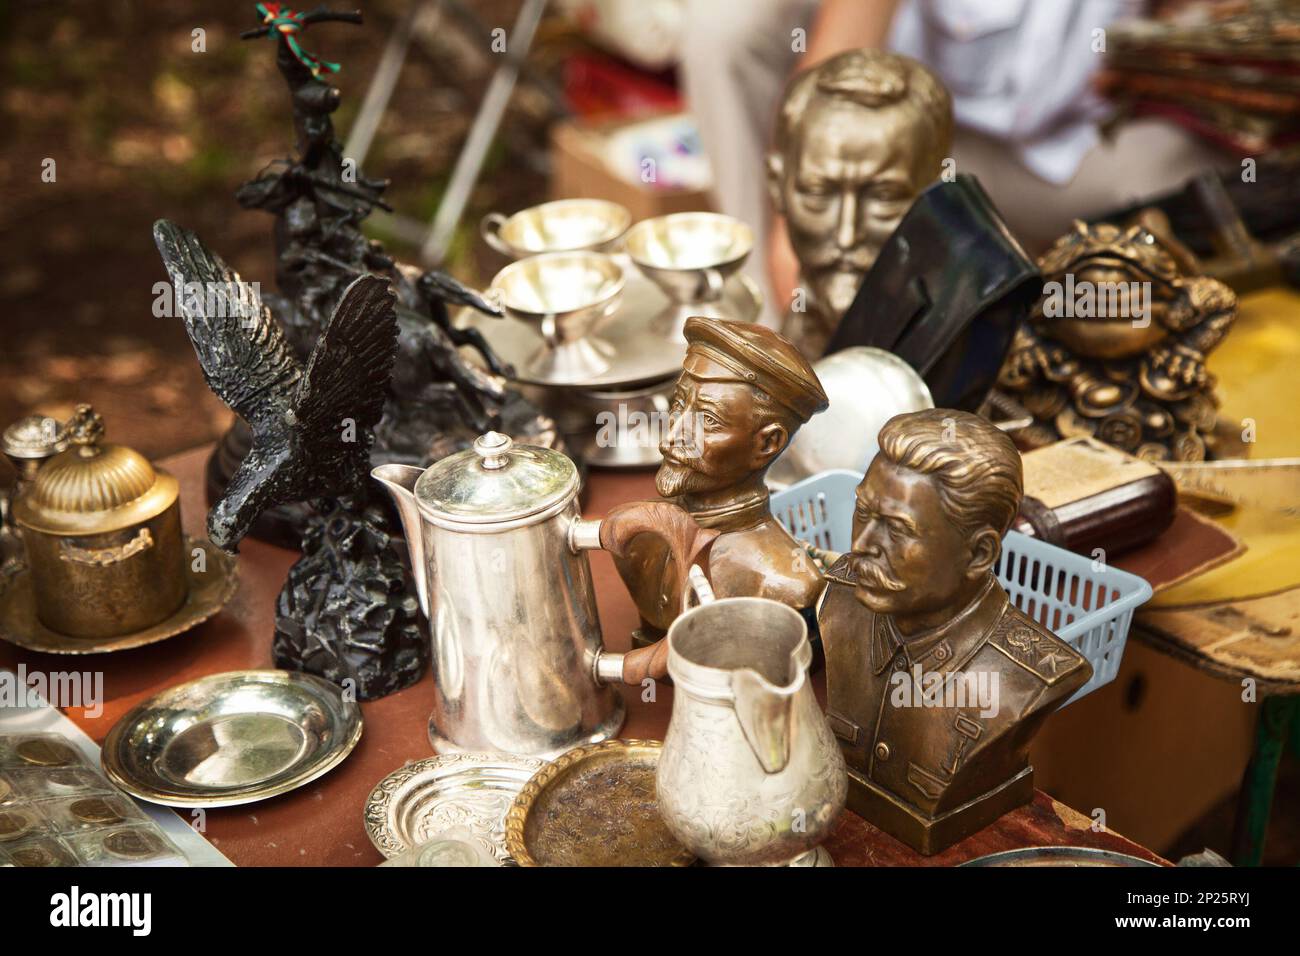 Khabarovsk, Russia - July 27, 2014: USSR famous historic persons busts and metal tableware at a flea market. Many old vintage things at a garage sale Stock Photo